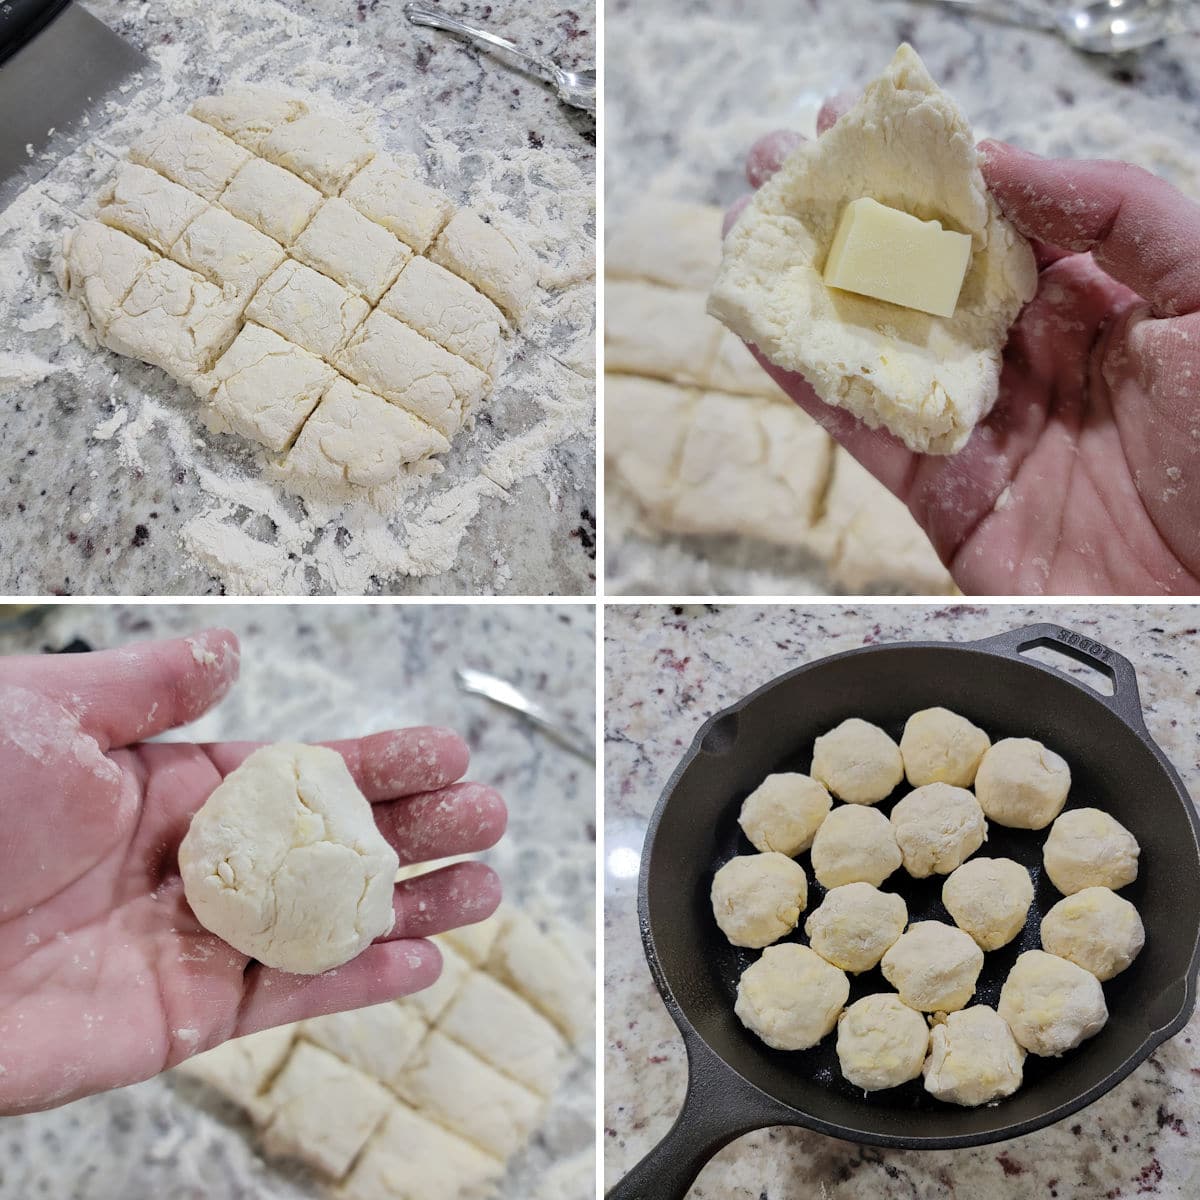 Making cheese stuffed biscuits.